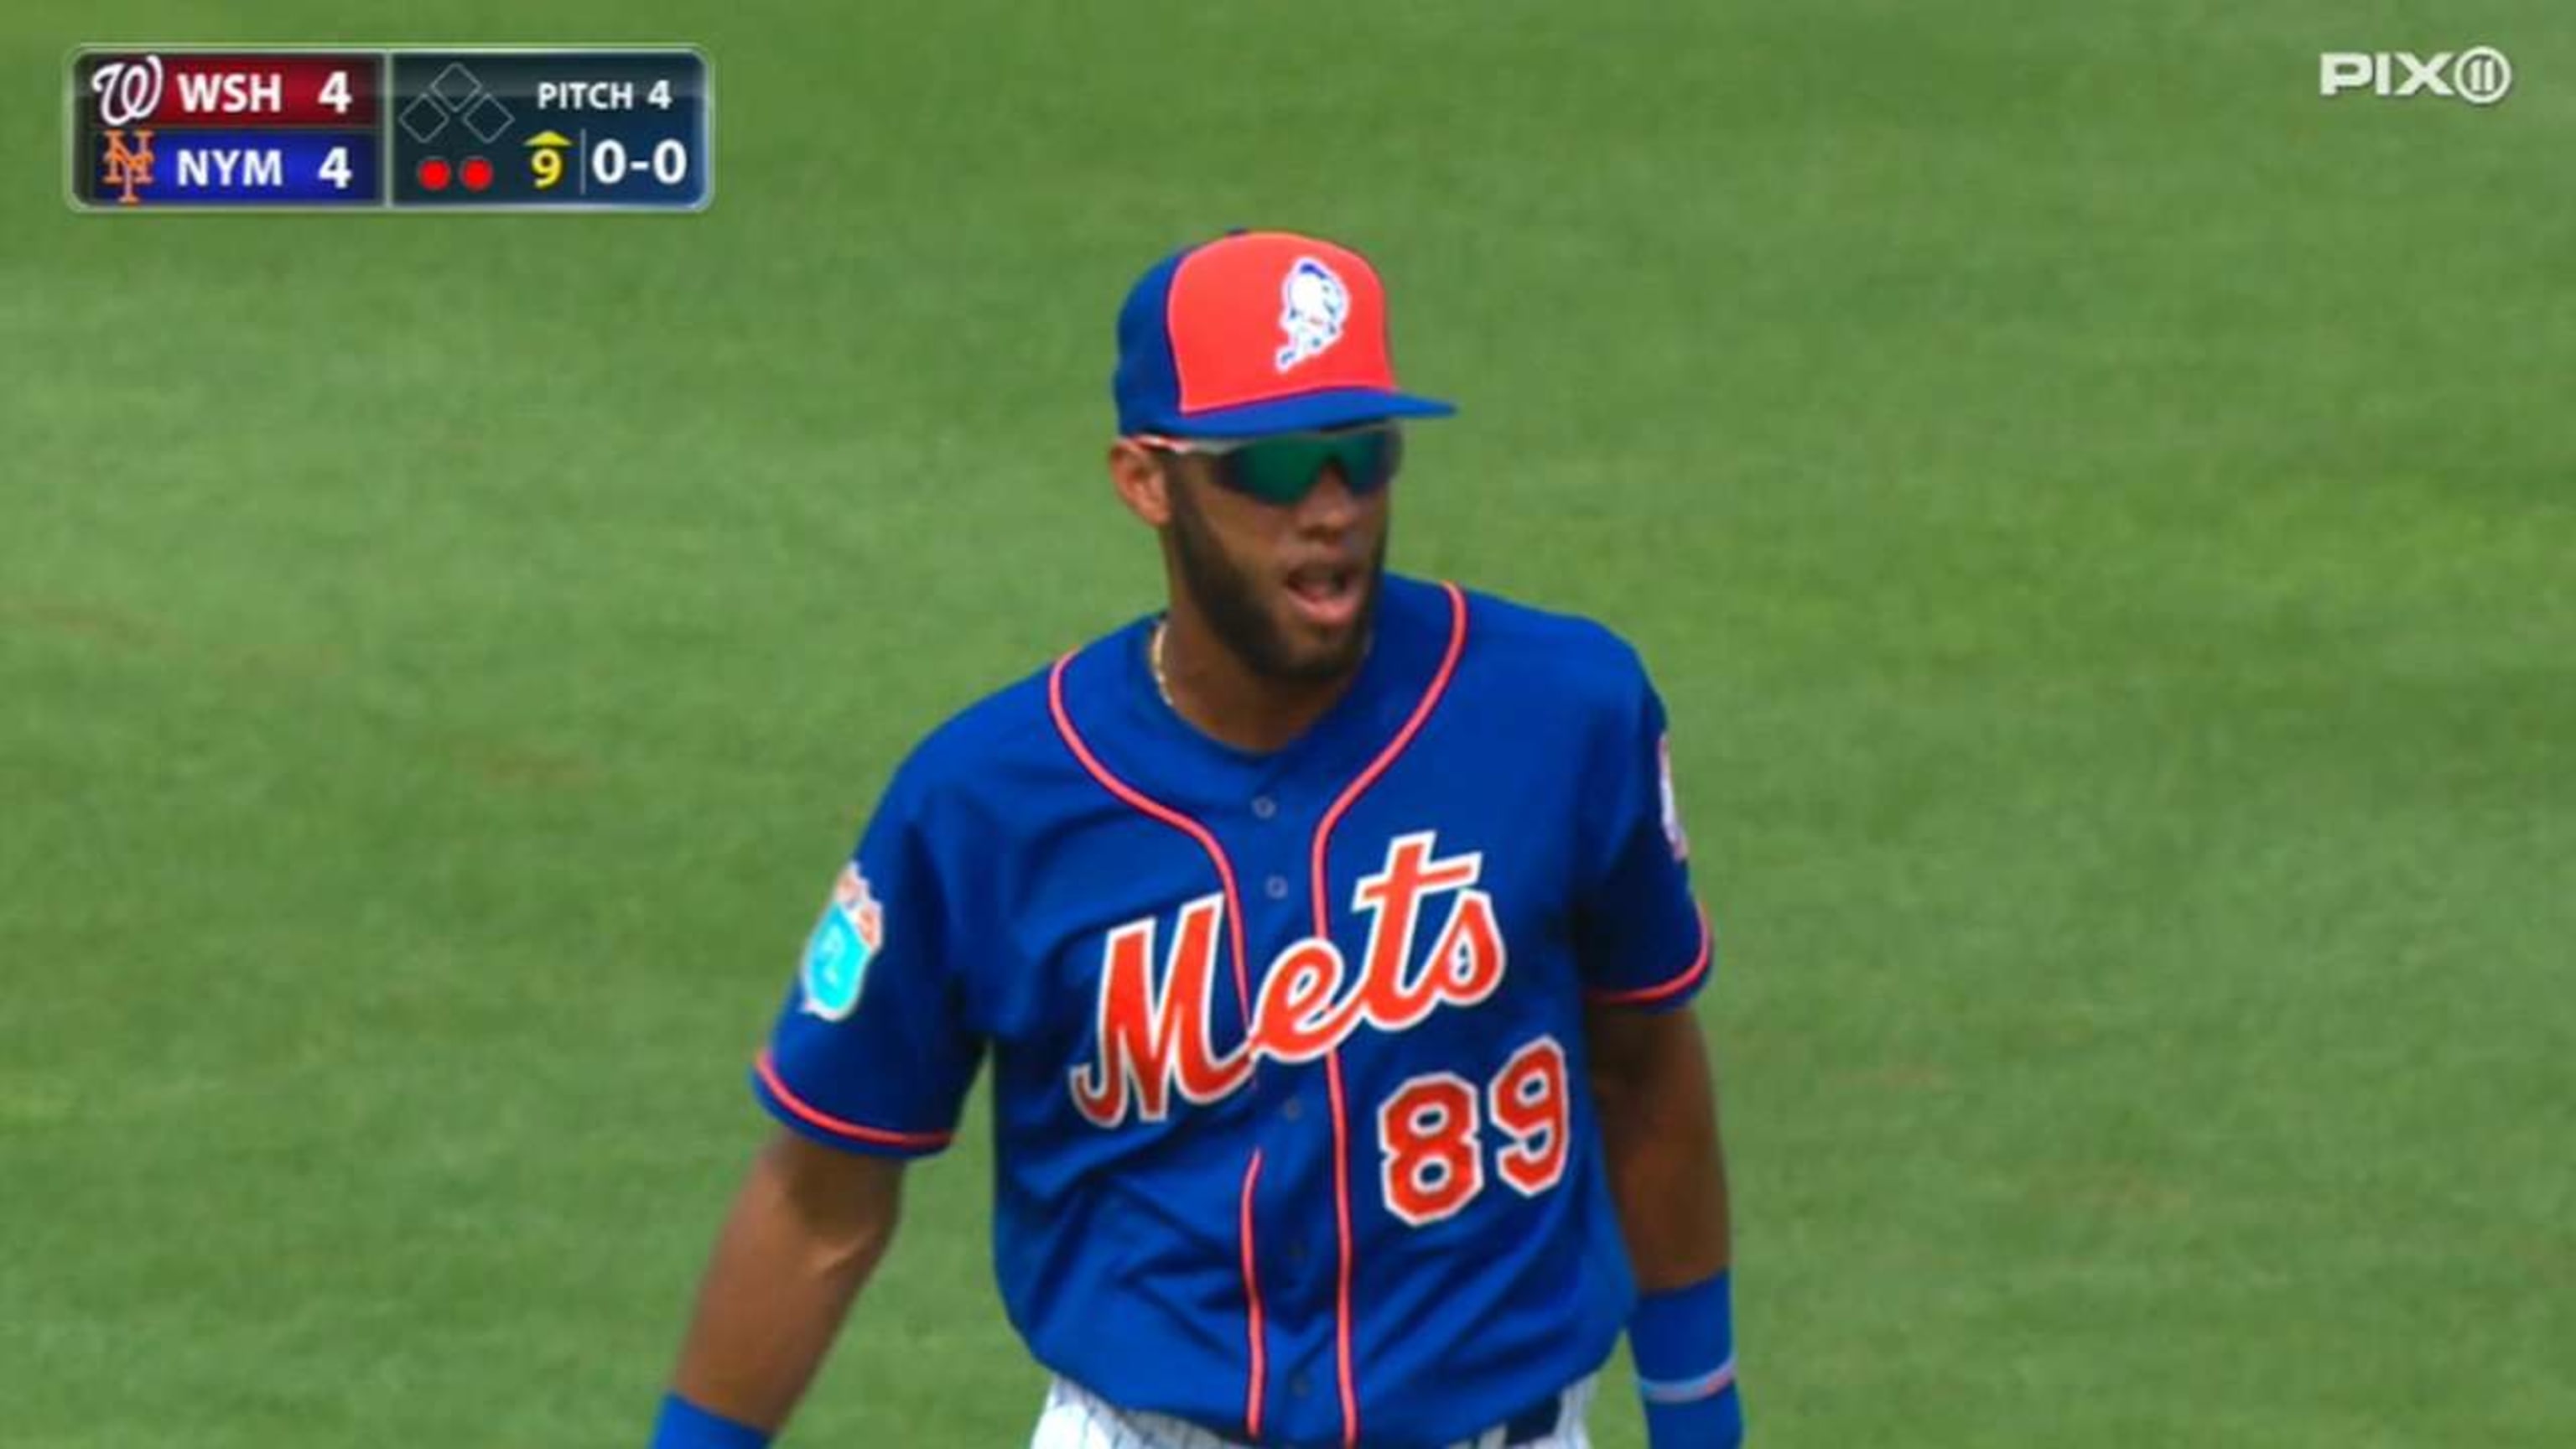 Amed Rosario carried the Mets in a big win over the Marlins